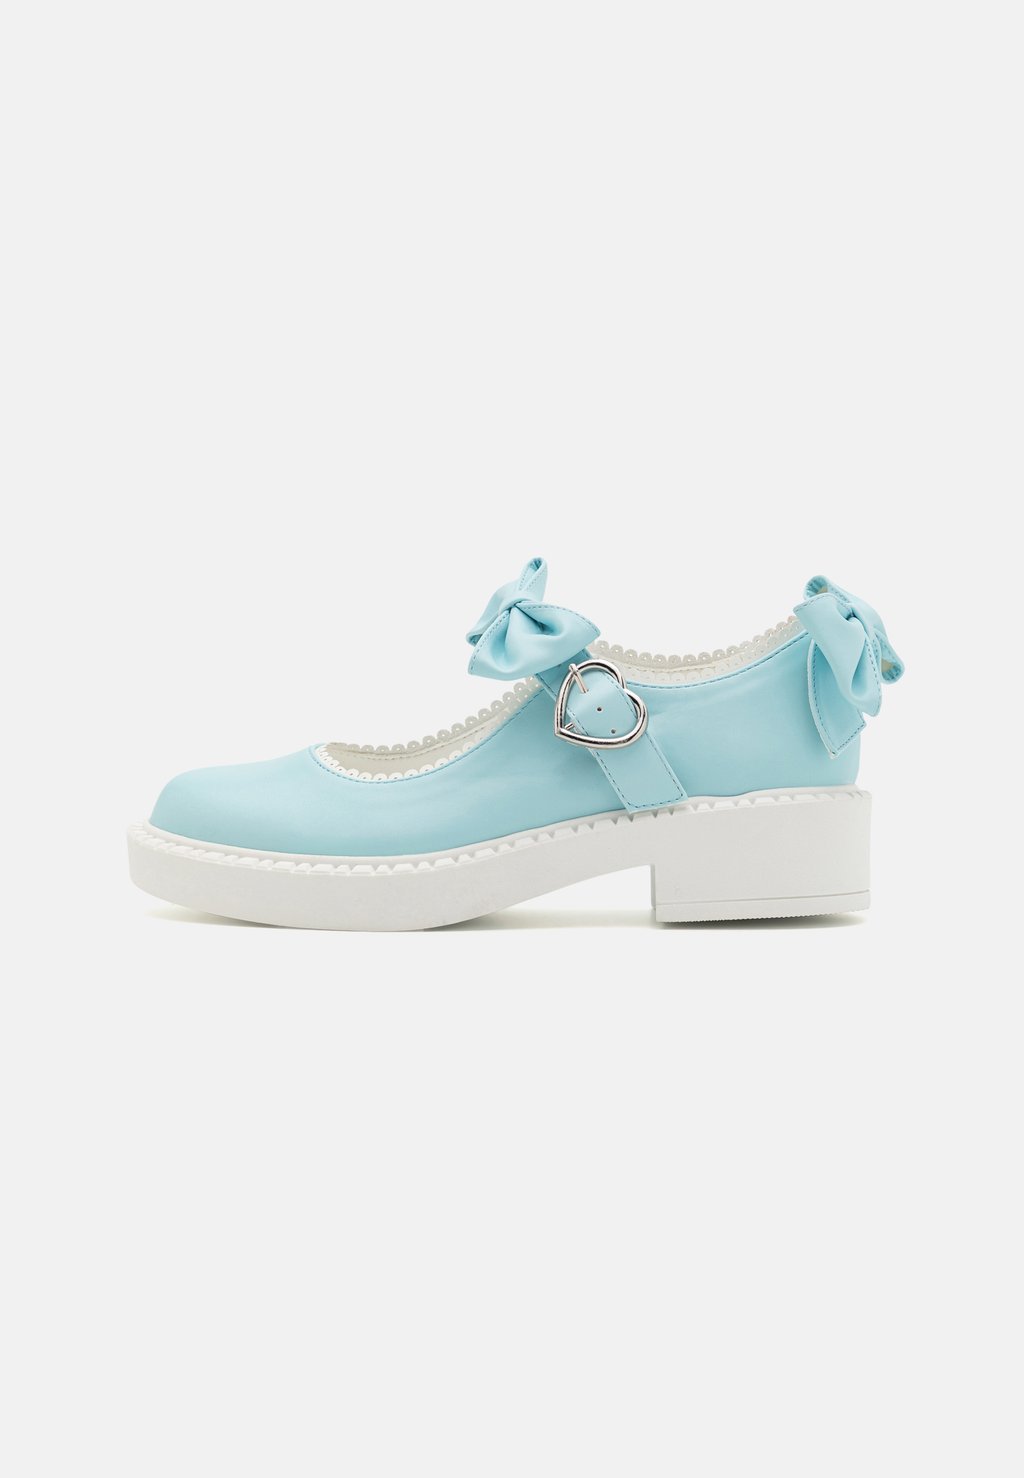 Туфли на платформе FAIRY LACE DOILY MARY JANE SHOES Koi Footwear, цвет blue 2020 spring new thick heel single shoes female fairy wind with shallow mouth retro gentle word buckle lace mary jane shoes